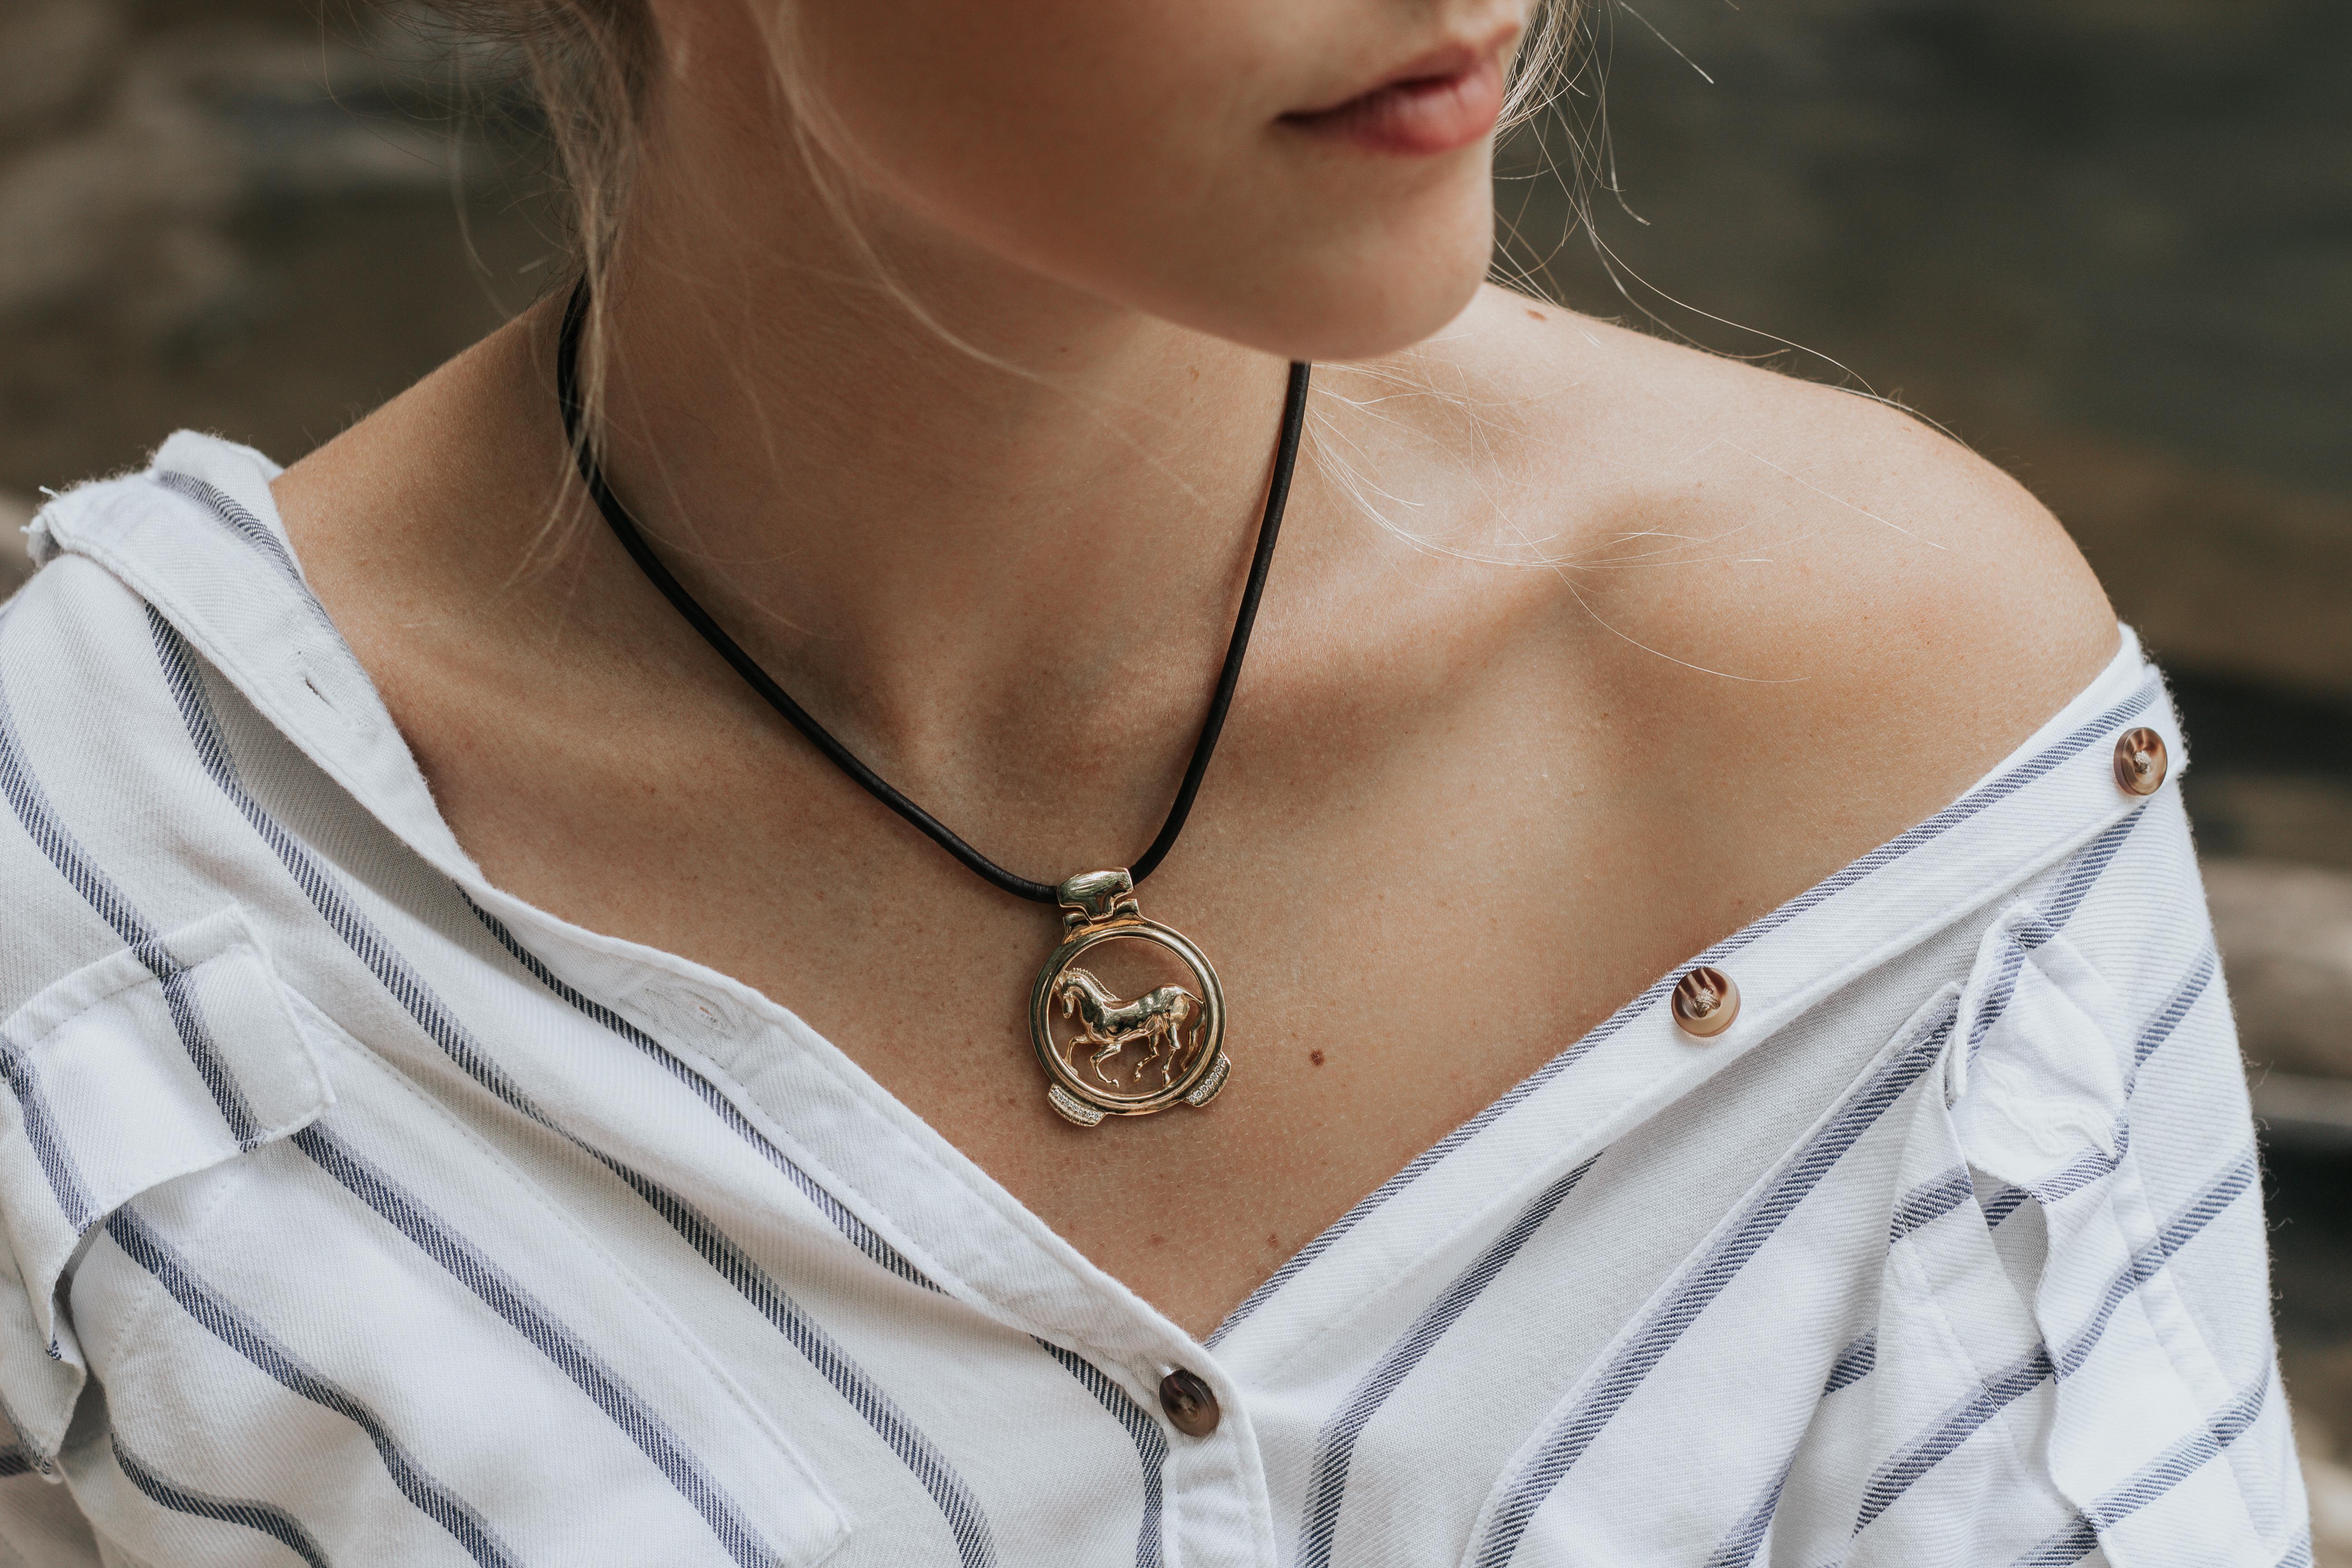 Part of the Vincent Peach Equestrian Collection, the Finnhorse Necklace has our signature 14kt Yellow Gold Horse Pendant with round White Diamonds on a Premium Leather Cord with a Luxurious Tahitian Pearl Clasp. This necklace comes in the Standard